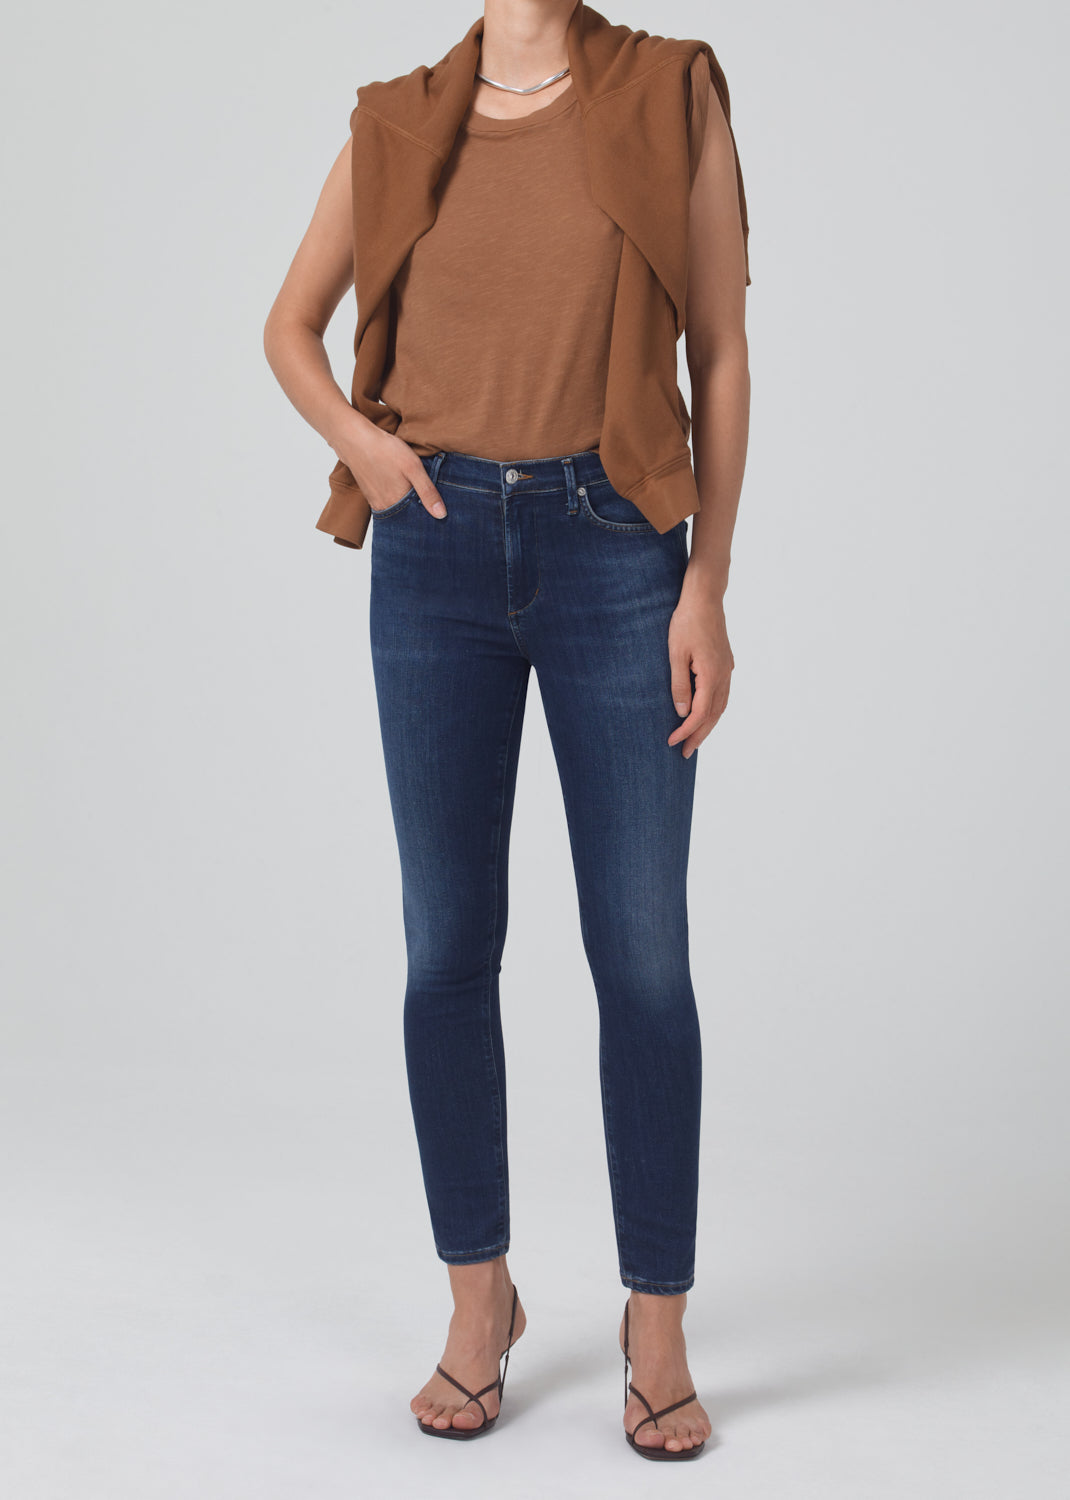 Rocket Ankle Mid Rise Skinny in Morella – Citizens of Humanity